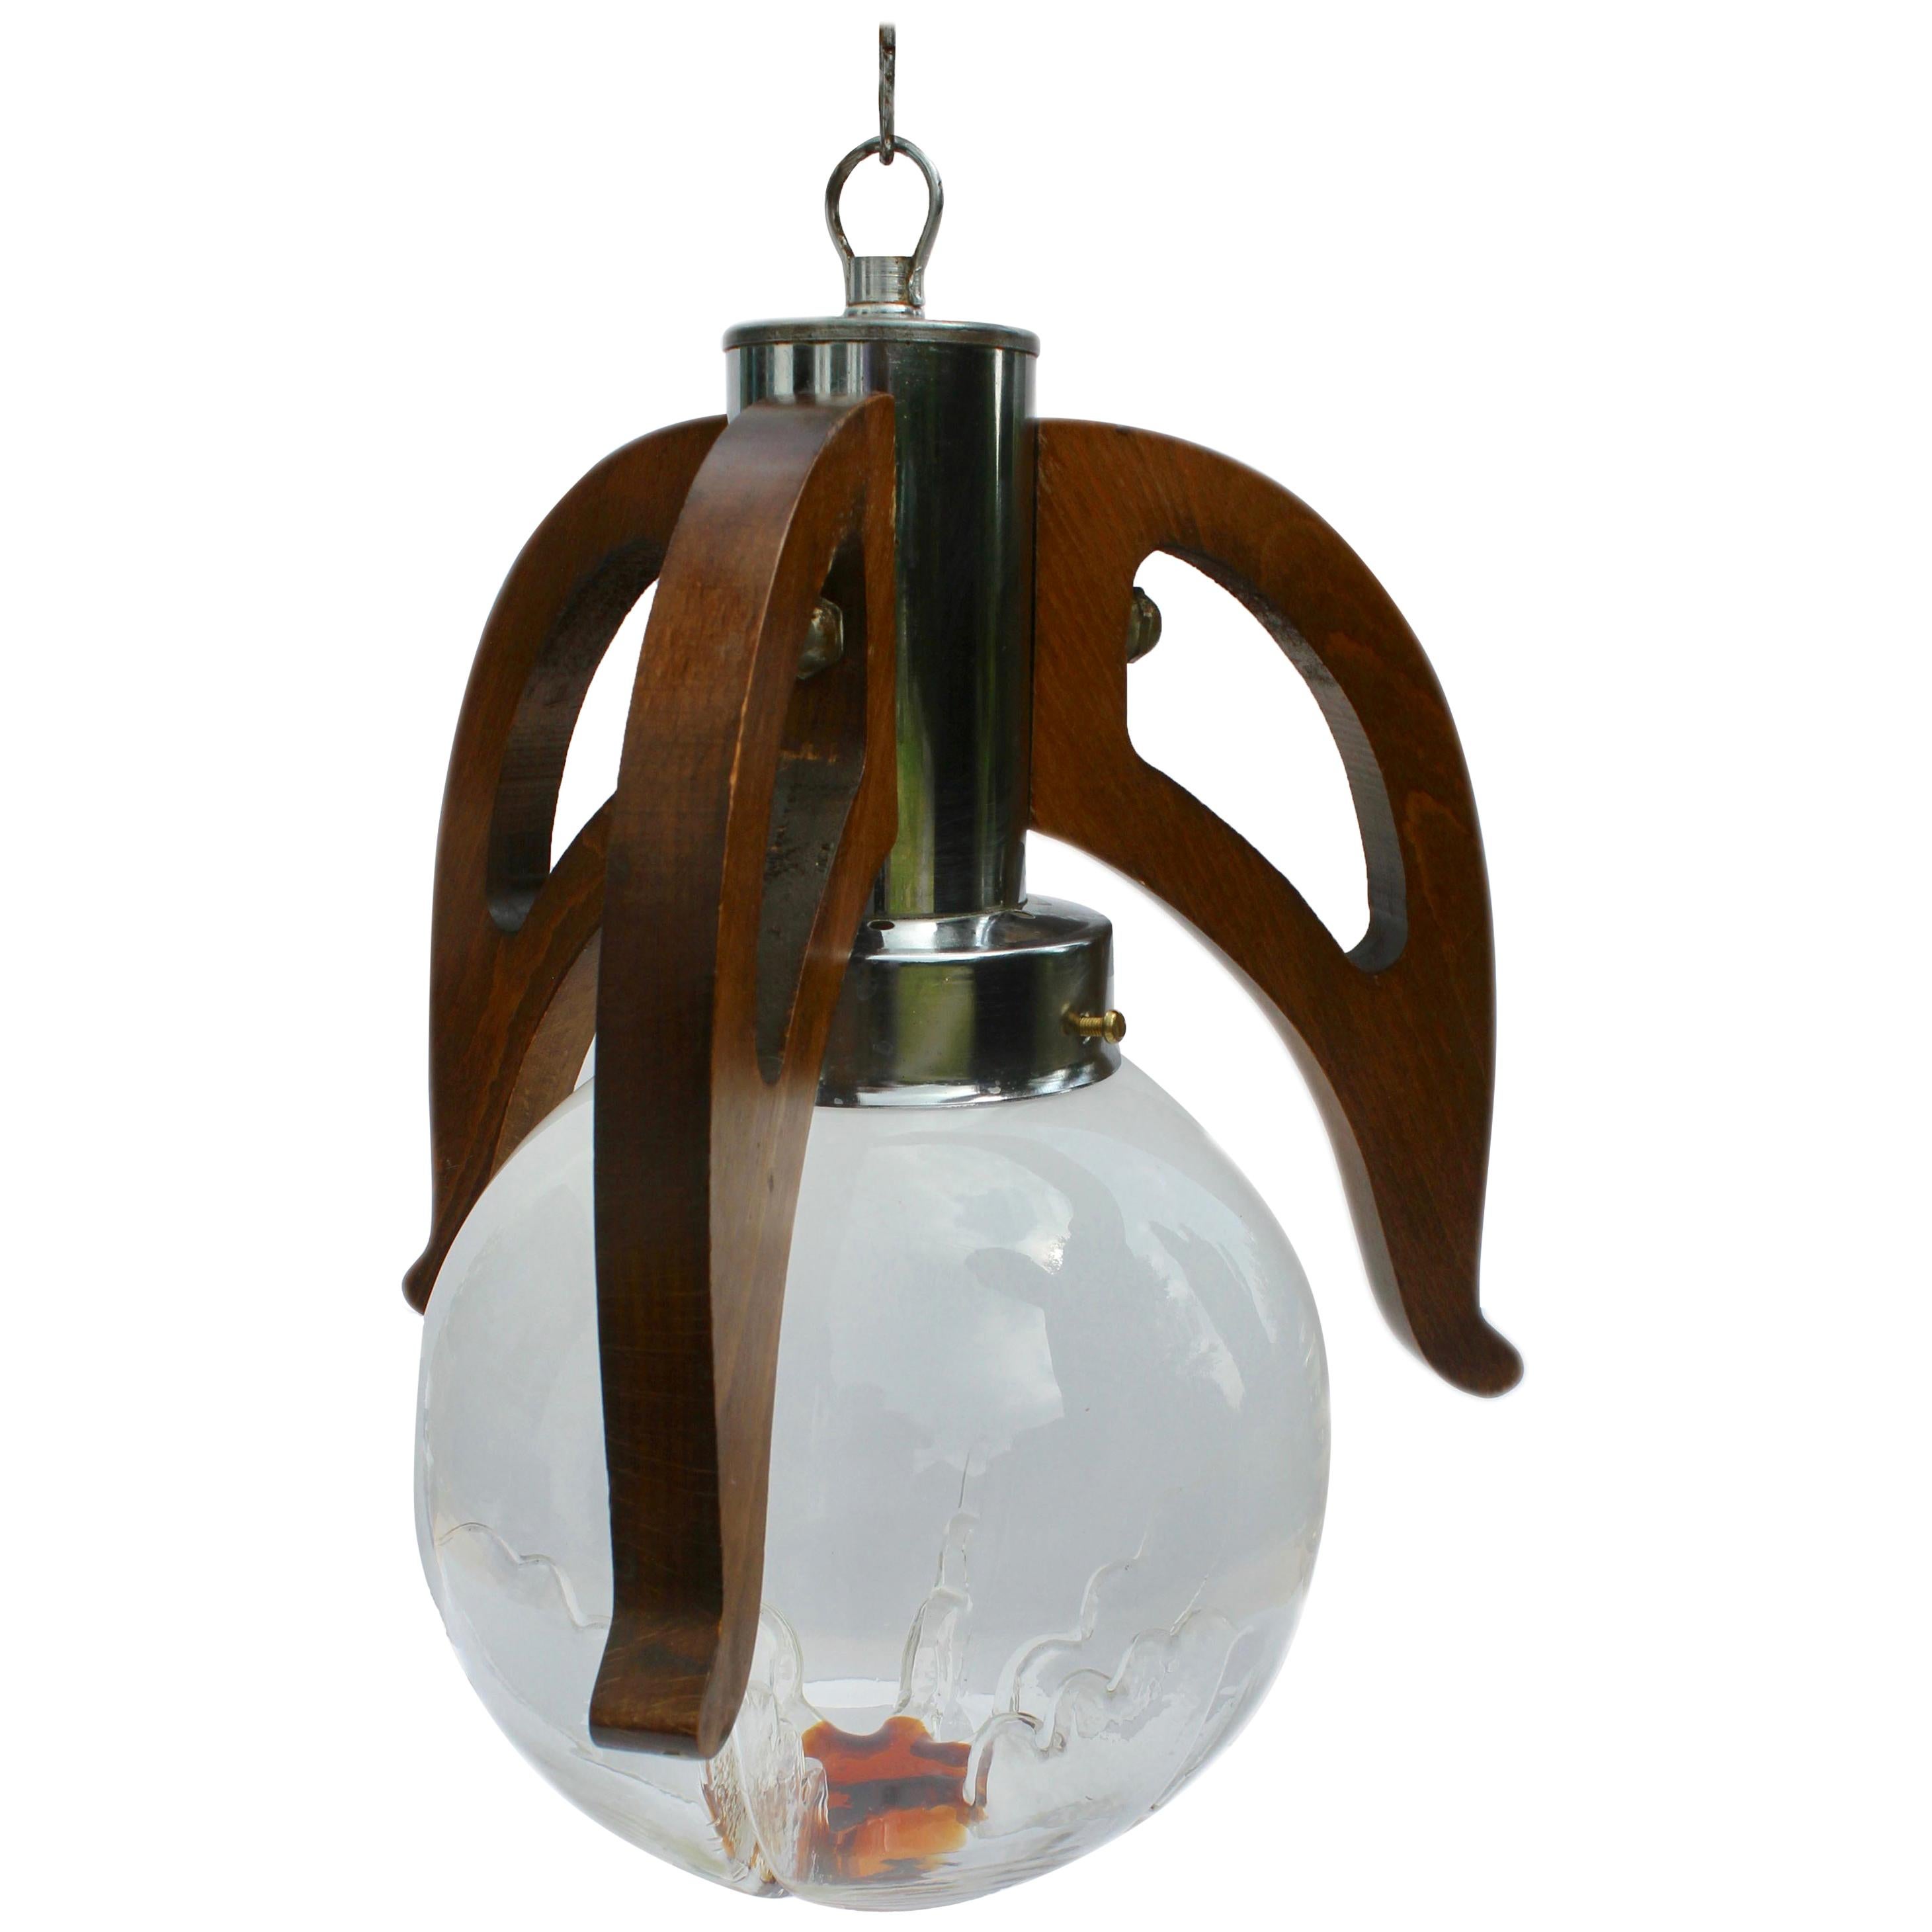 Art Deco Pendant by Mazzega with Globes of Clear Glass with Orange Inclusions